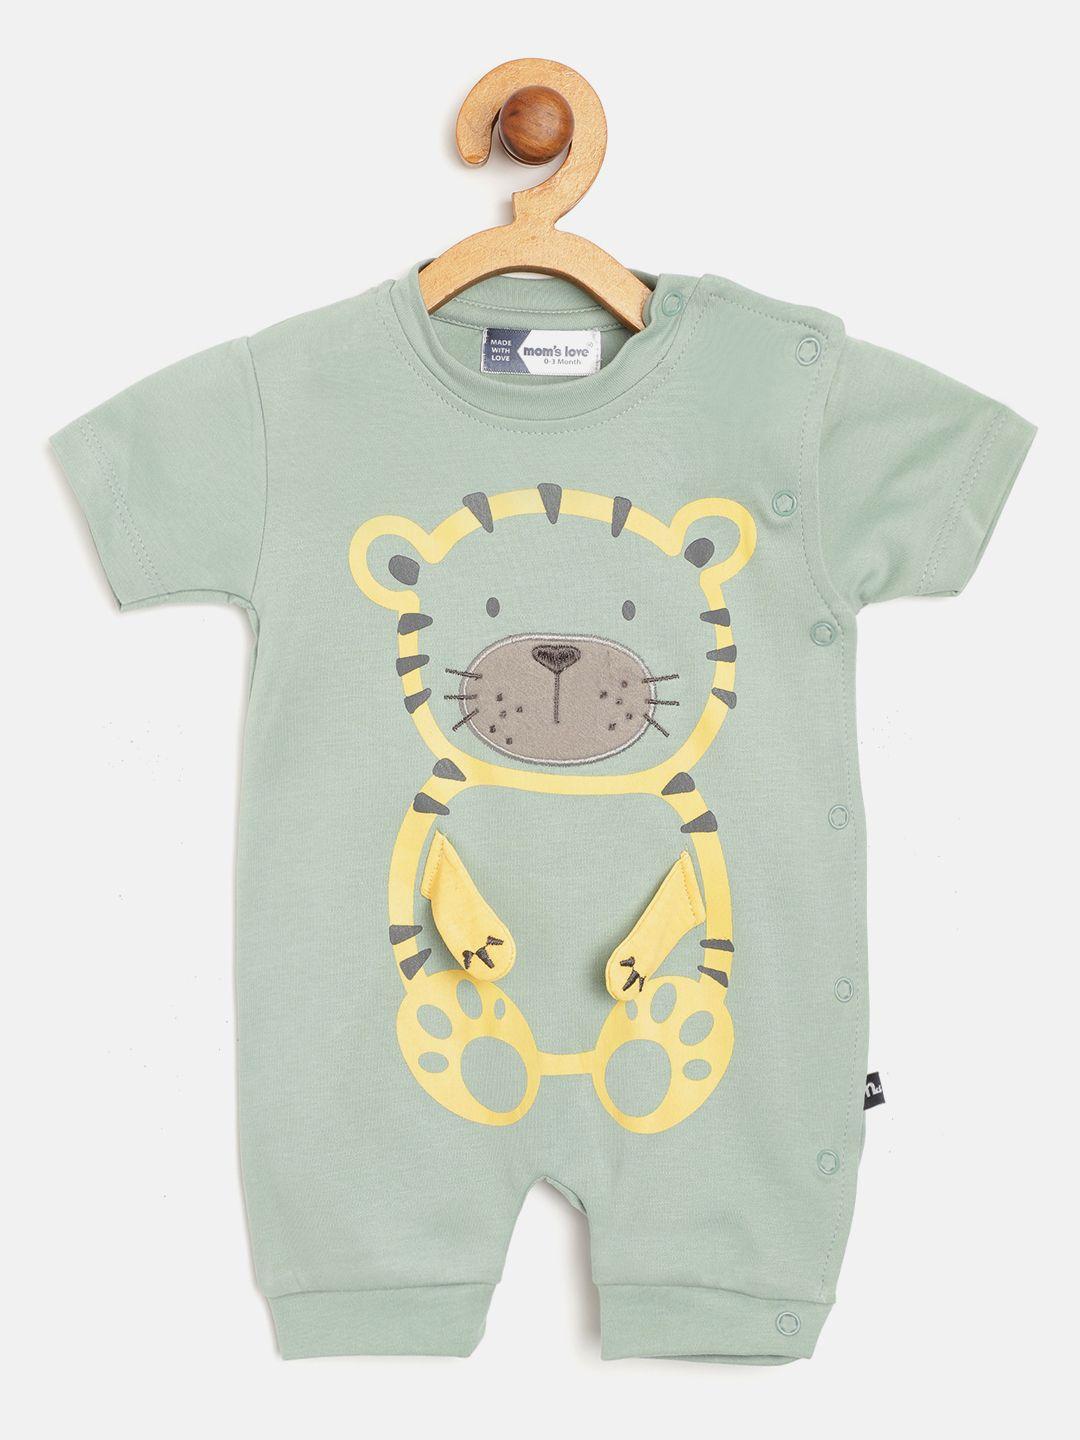 moms-love-infant-boys-mint-green-&-mustard-yellow-pure-cotton-tiger-print-rompers